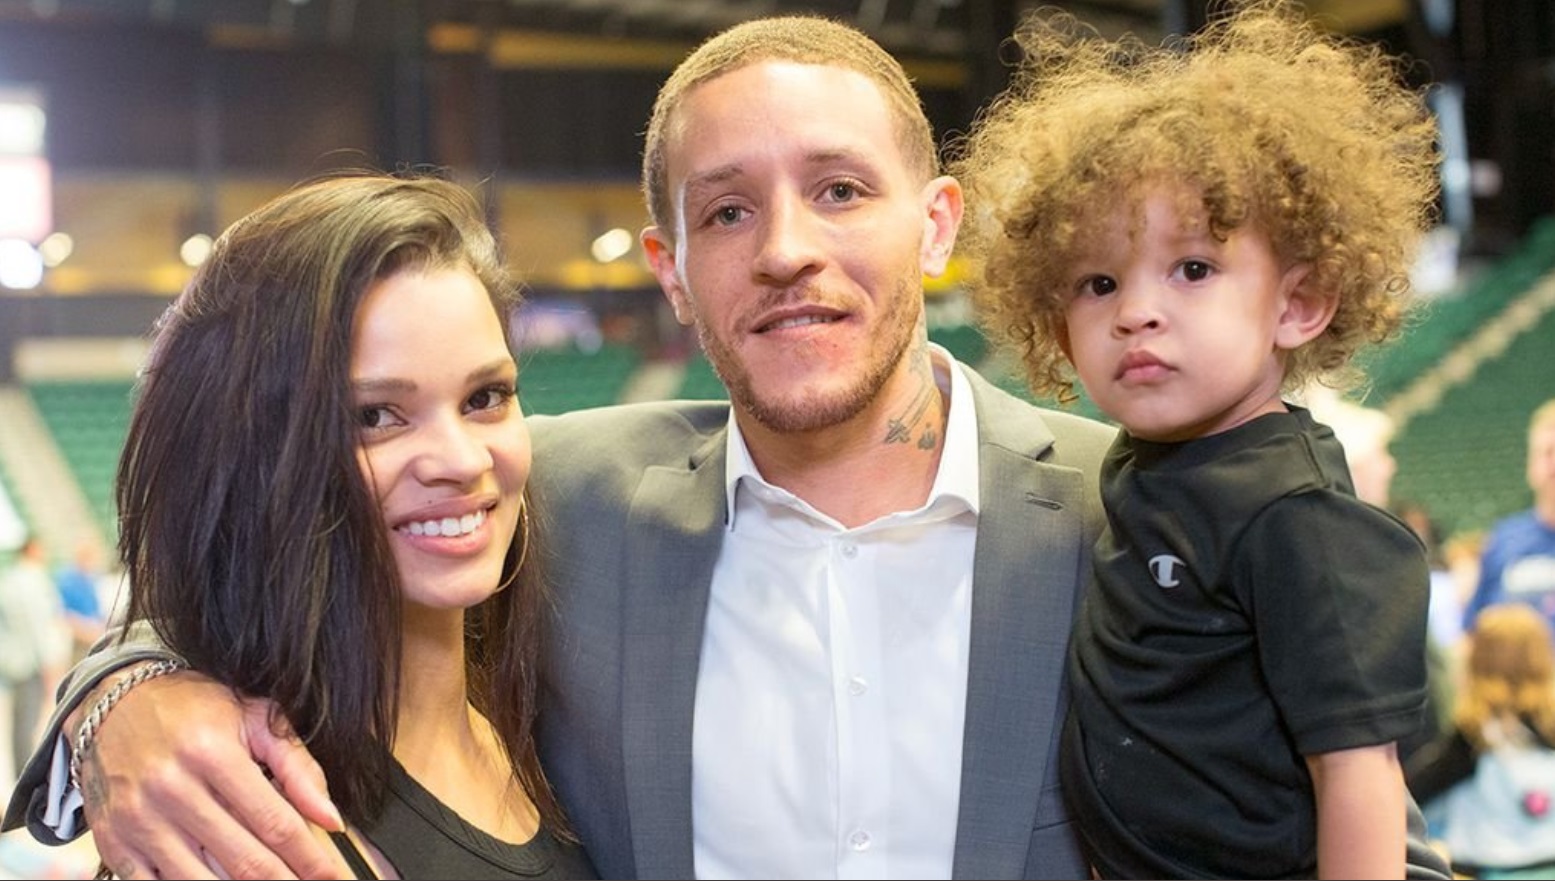 PHOTO Delonte West With His Wife And Son Before He Turned To Drugs